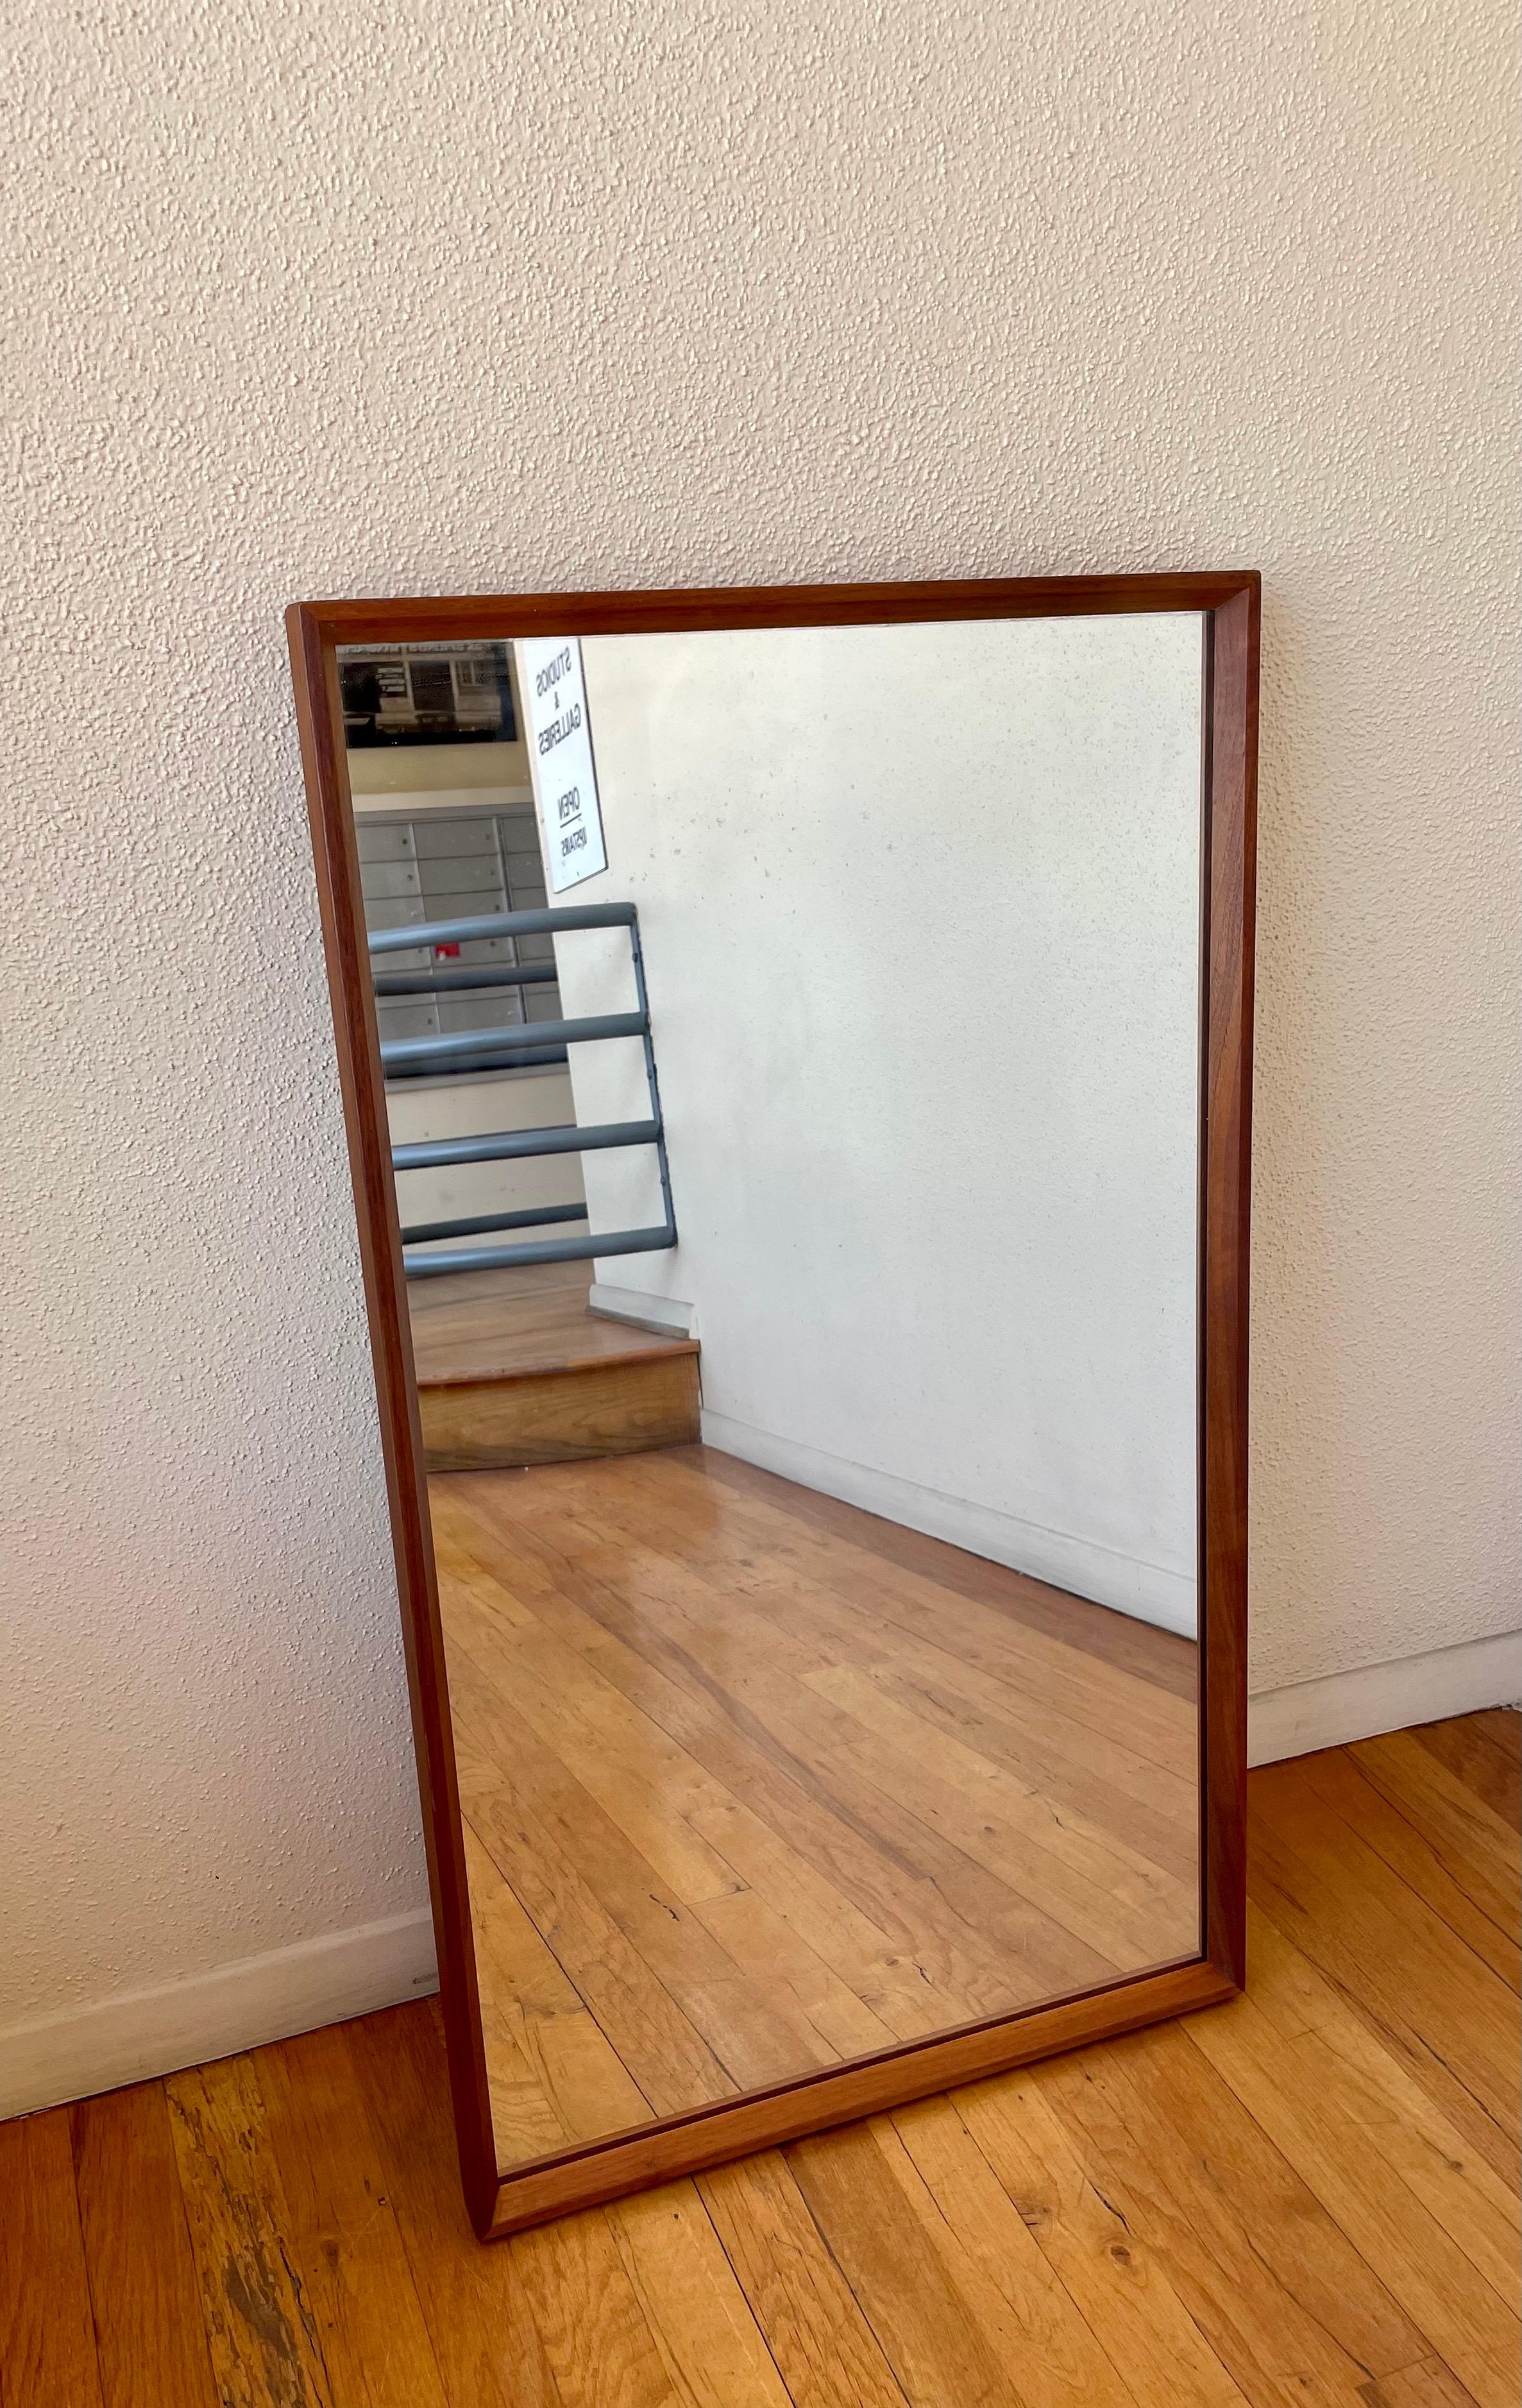 Beautiful, sleek, rectangular mirror with a solid teak frame Attributed to Pedersen & Hansen of Denmark. Superb quality and craftsmanship; the mirror is finished with a nice beveled edge. The mirror can be easily hanged horizontally or vertically.